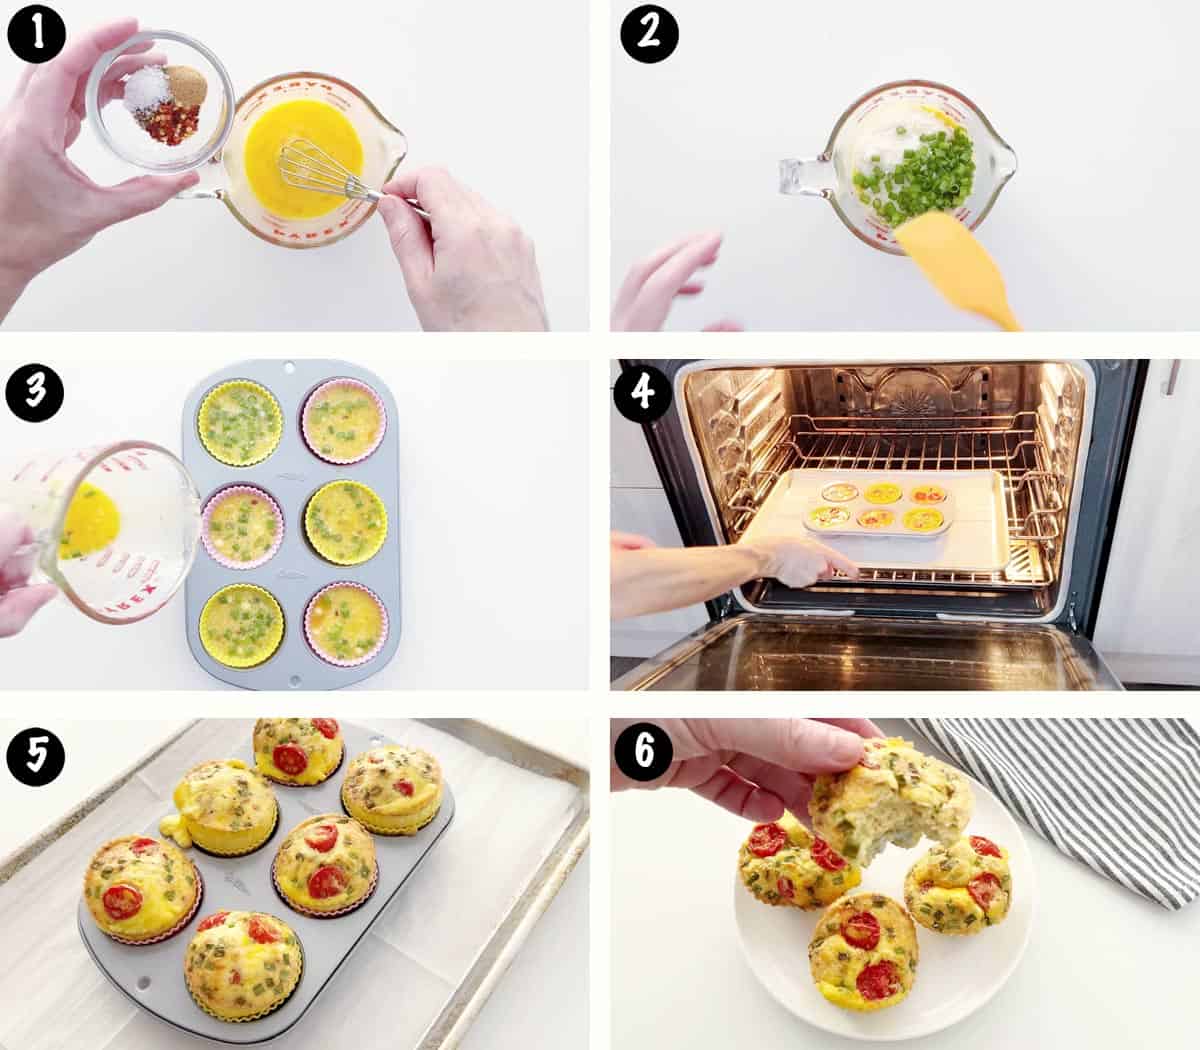 A six-photo collage showing the steps for making egg muffins. 